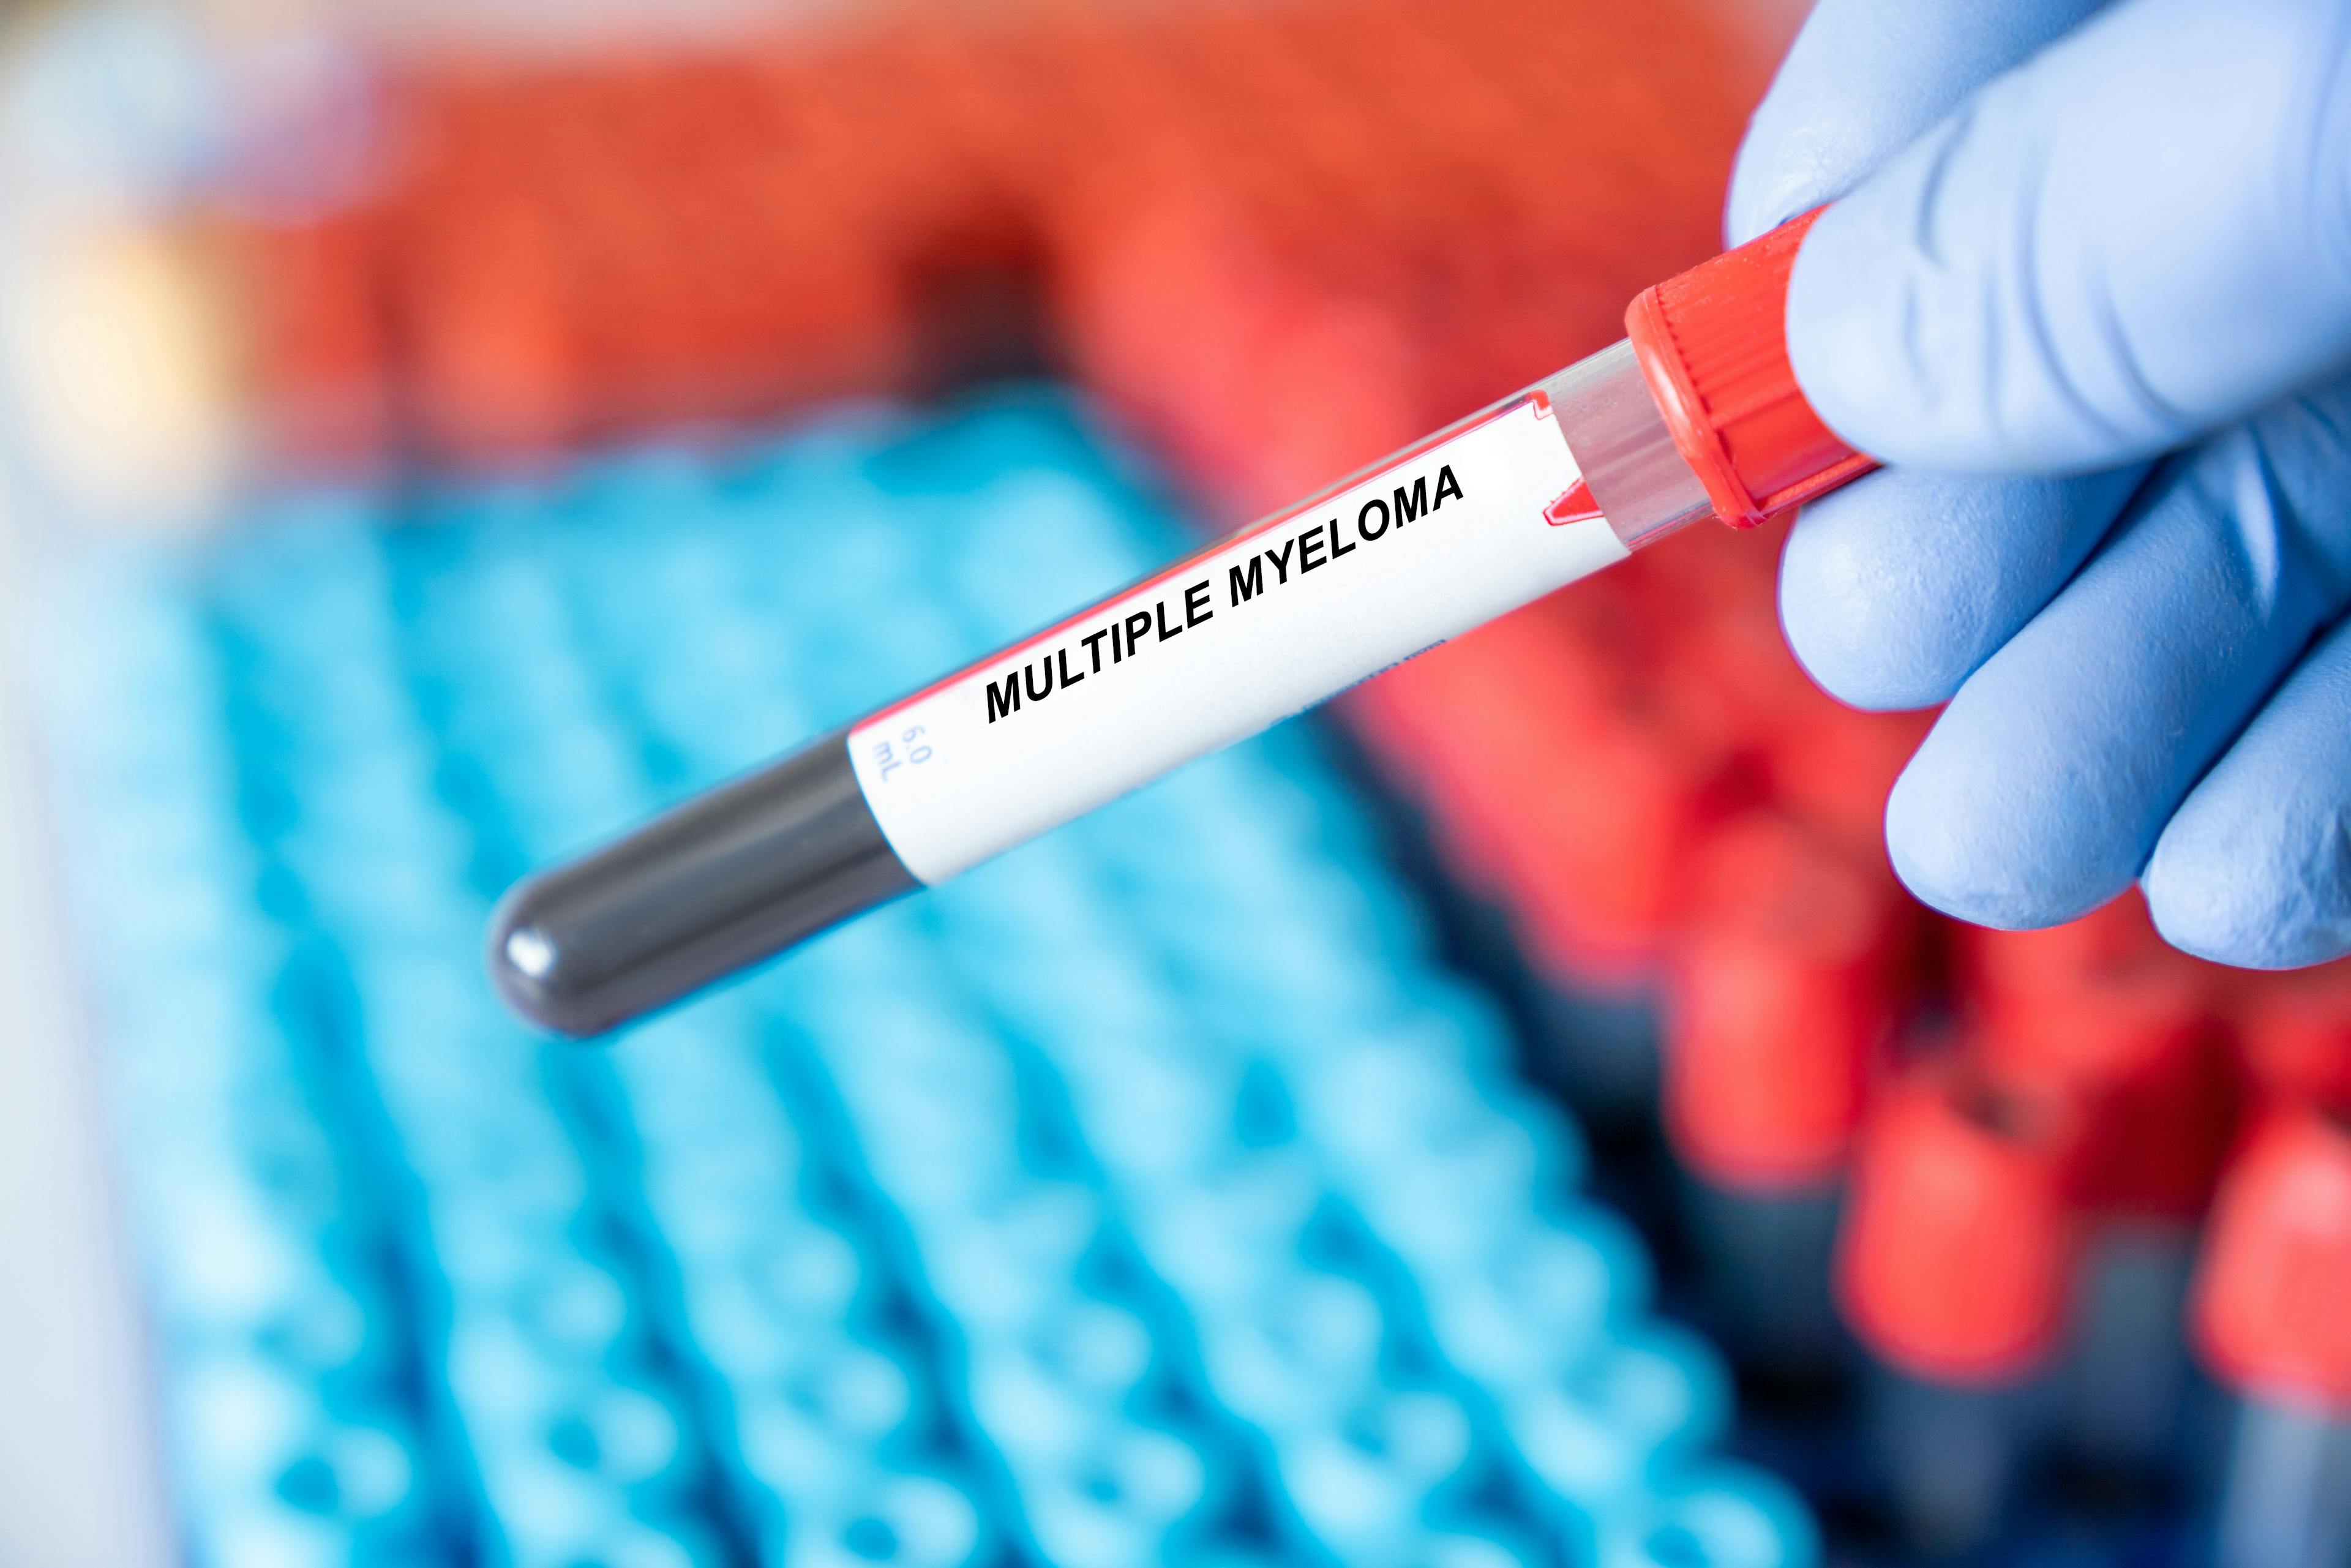 Multiple Myeloma disease blood test in medical laboratory | Image Credit: luchschenF - stock.adobe.com